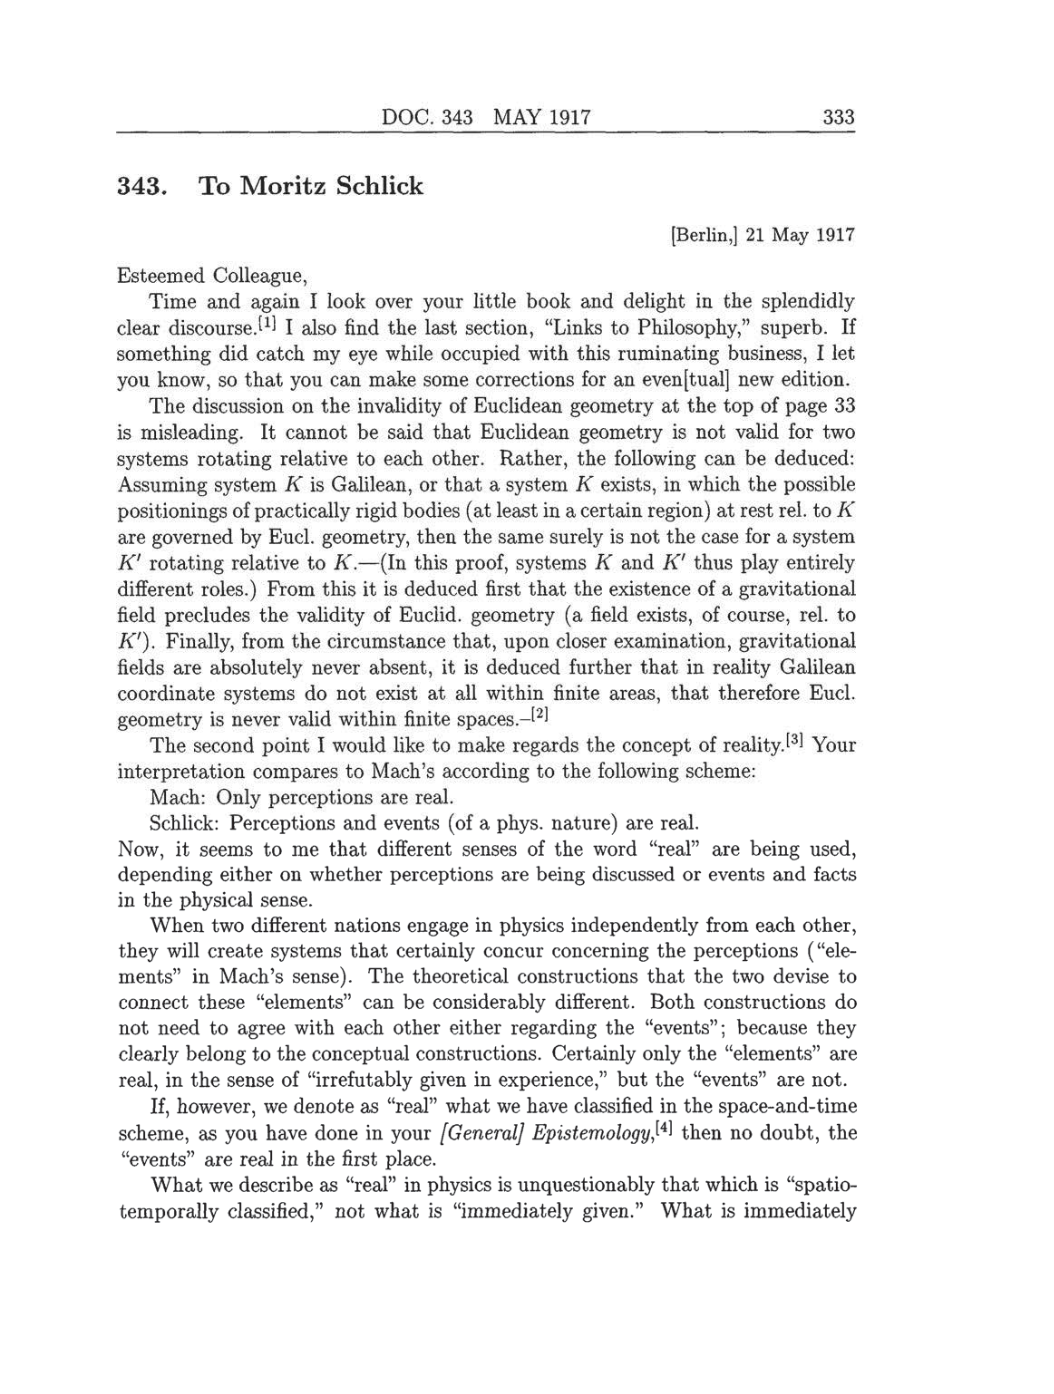 Volume 8: The Berlin Years: Correspondence, 1914-1918 (English translation supplement) page 333